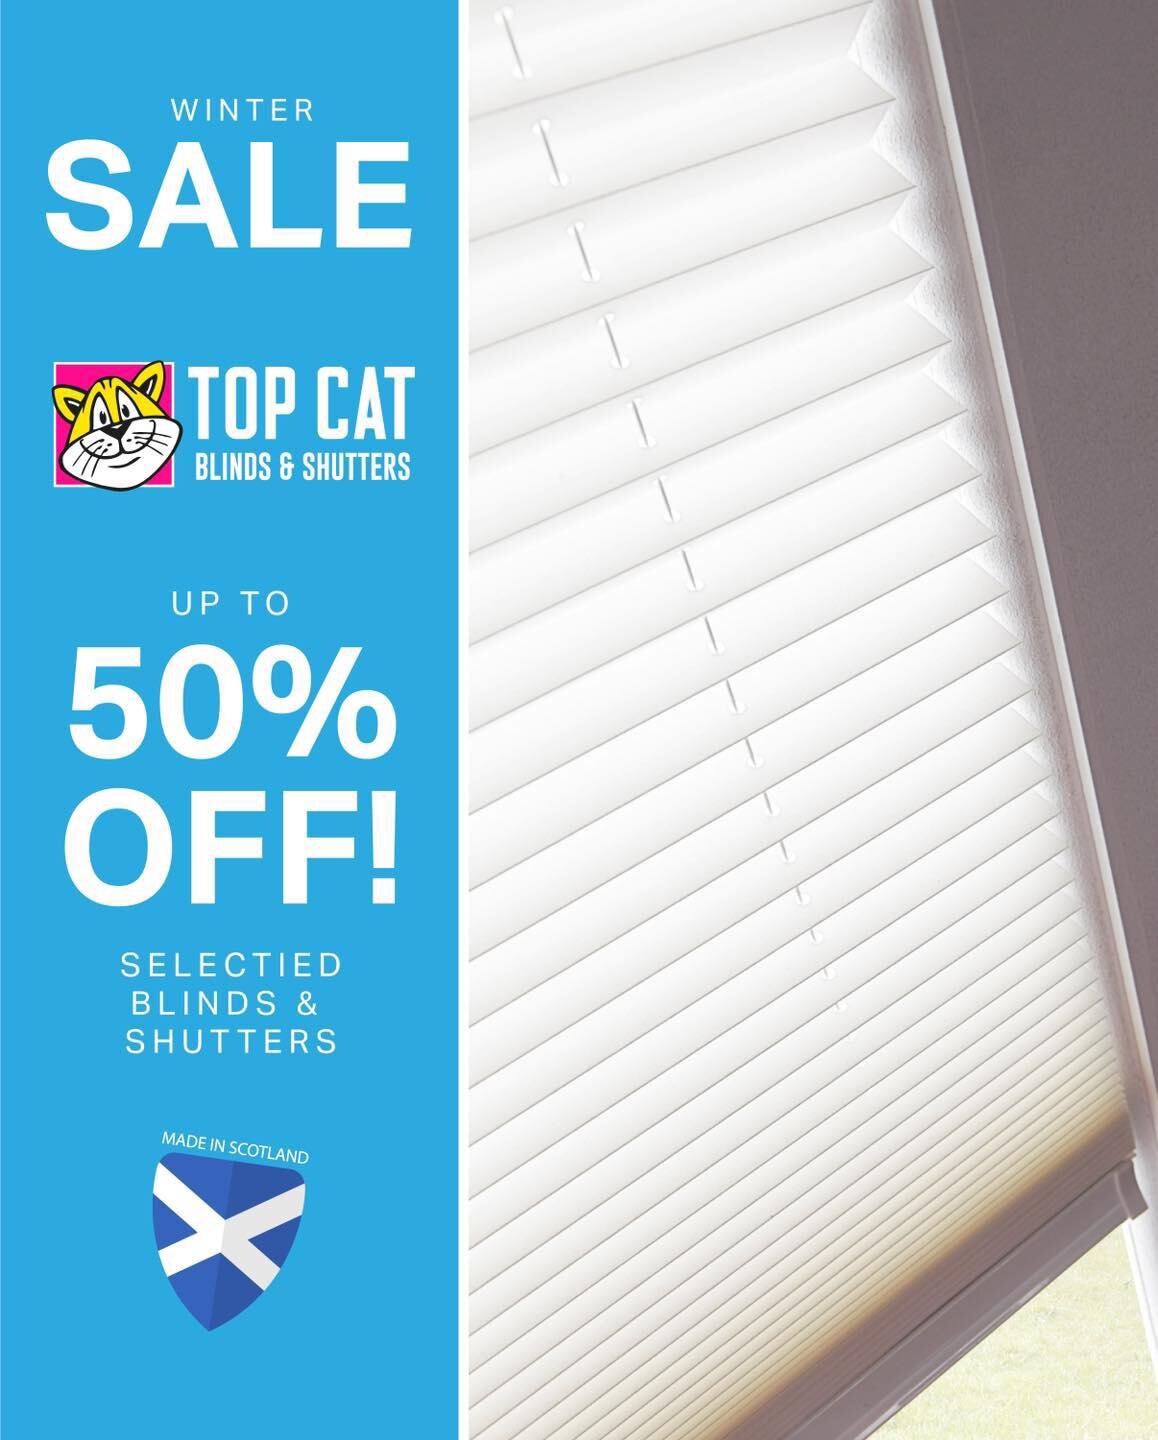 🏴󠁧󠁢󠁳󠁣󠁴󠁿 Scotland&rsquo;s Premier Blinds &amp; Shutters
🔥 LAST CHANCE TO SAVE! - UP TO 50% OFF!
✅ FREE Measurement, Quote &amp; Fitting
📝 Call or message for an appointment now!
☎️ 0141 212 6966 | www.topcatblinds.co.uk